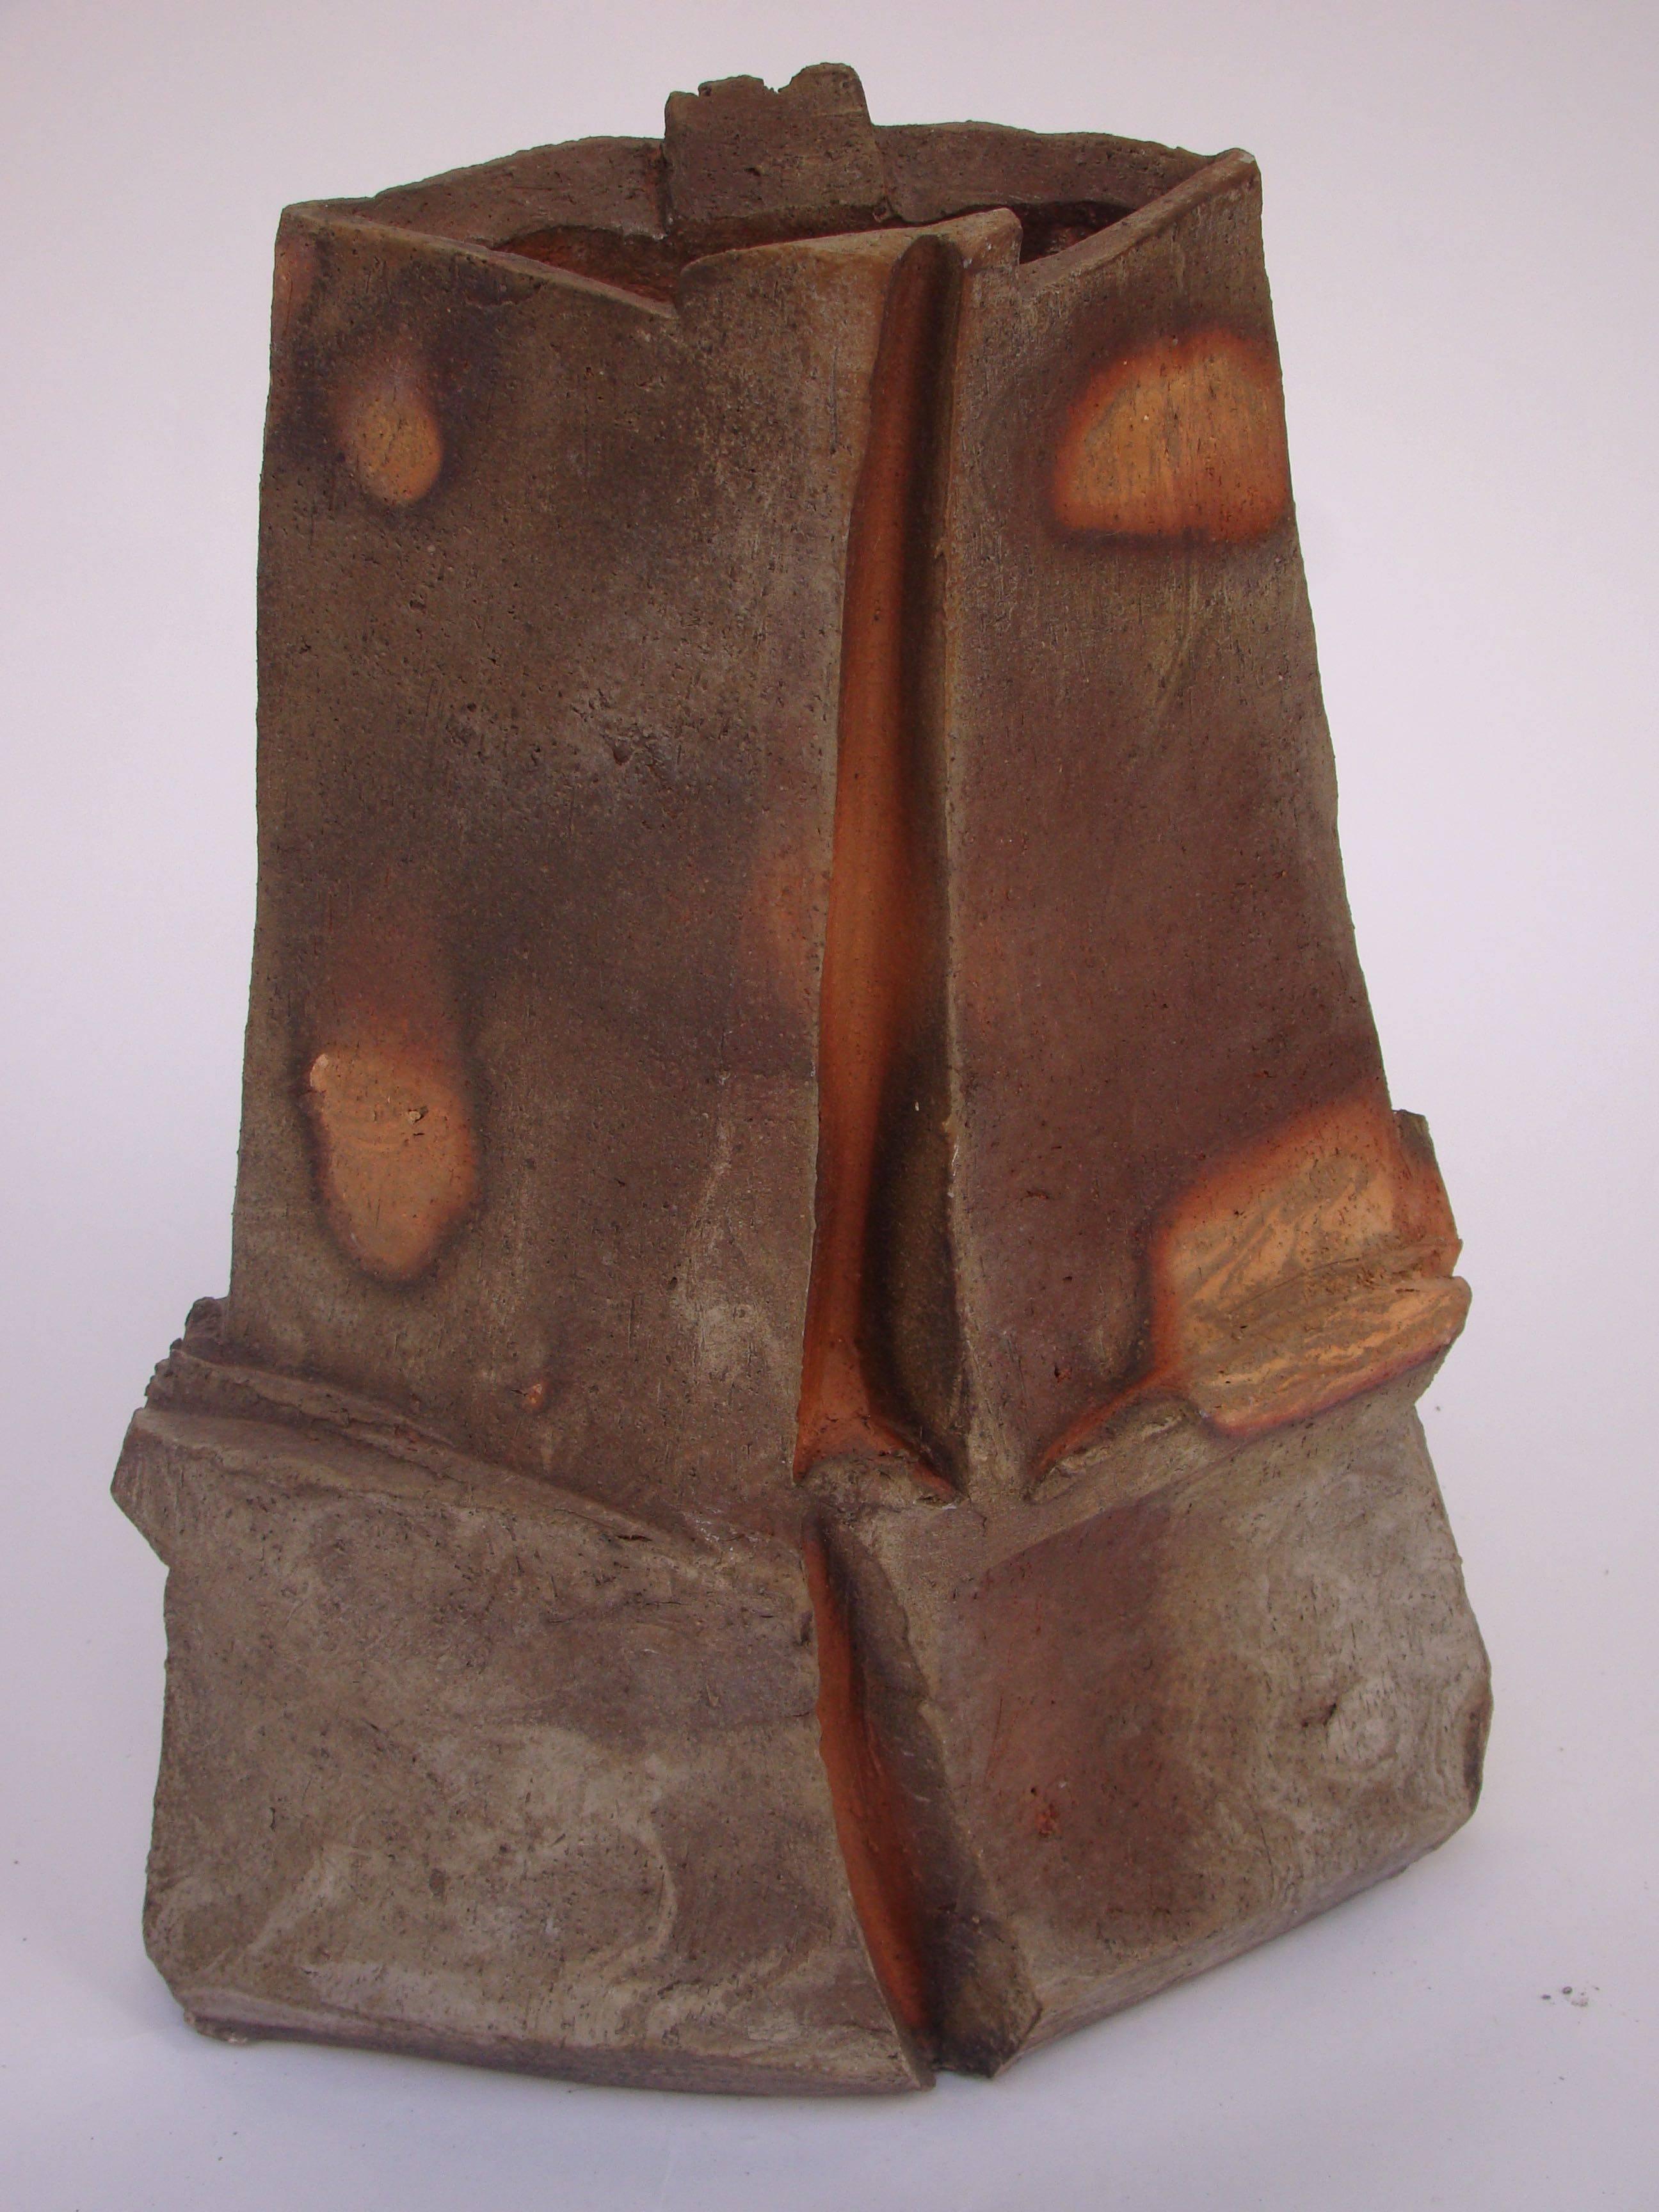 French Brutalist Ceramic Sculpture by Eric Astoul, circa 1980-1990 For Sale